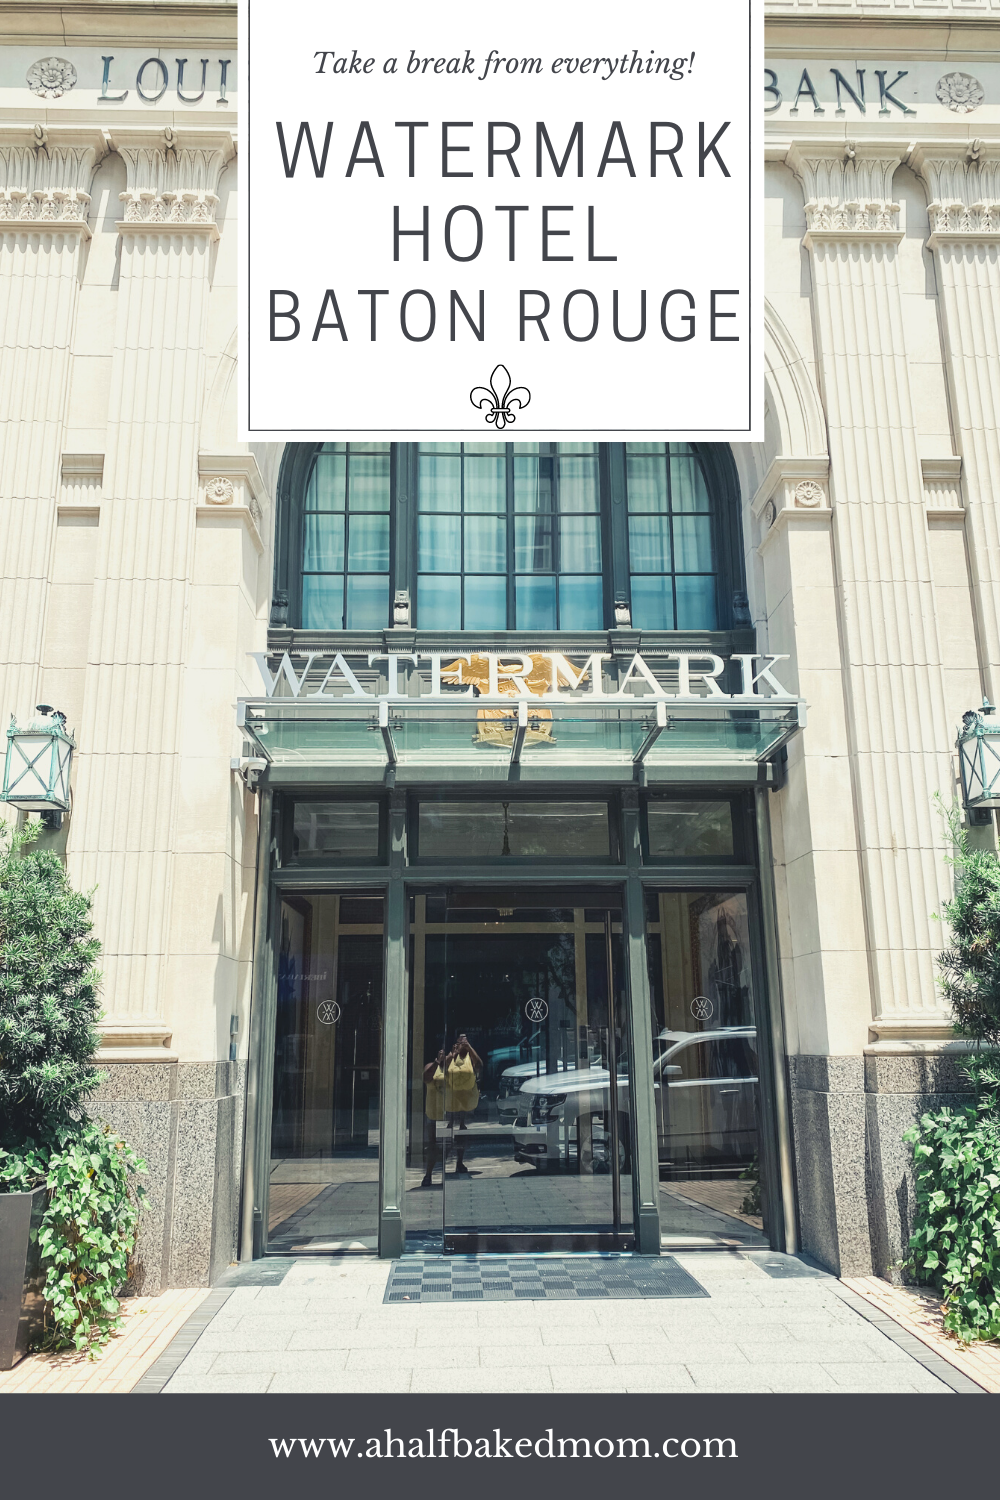 Staycation At The Watermark Hotel in Downtown Baton Rouge